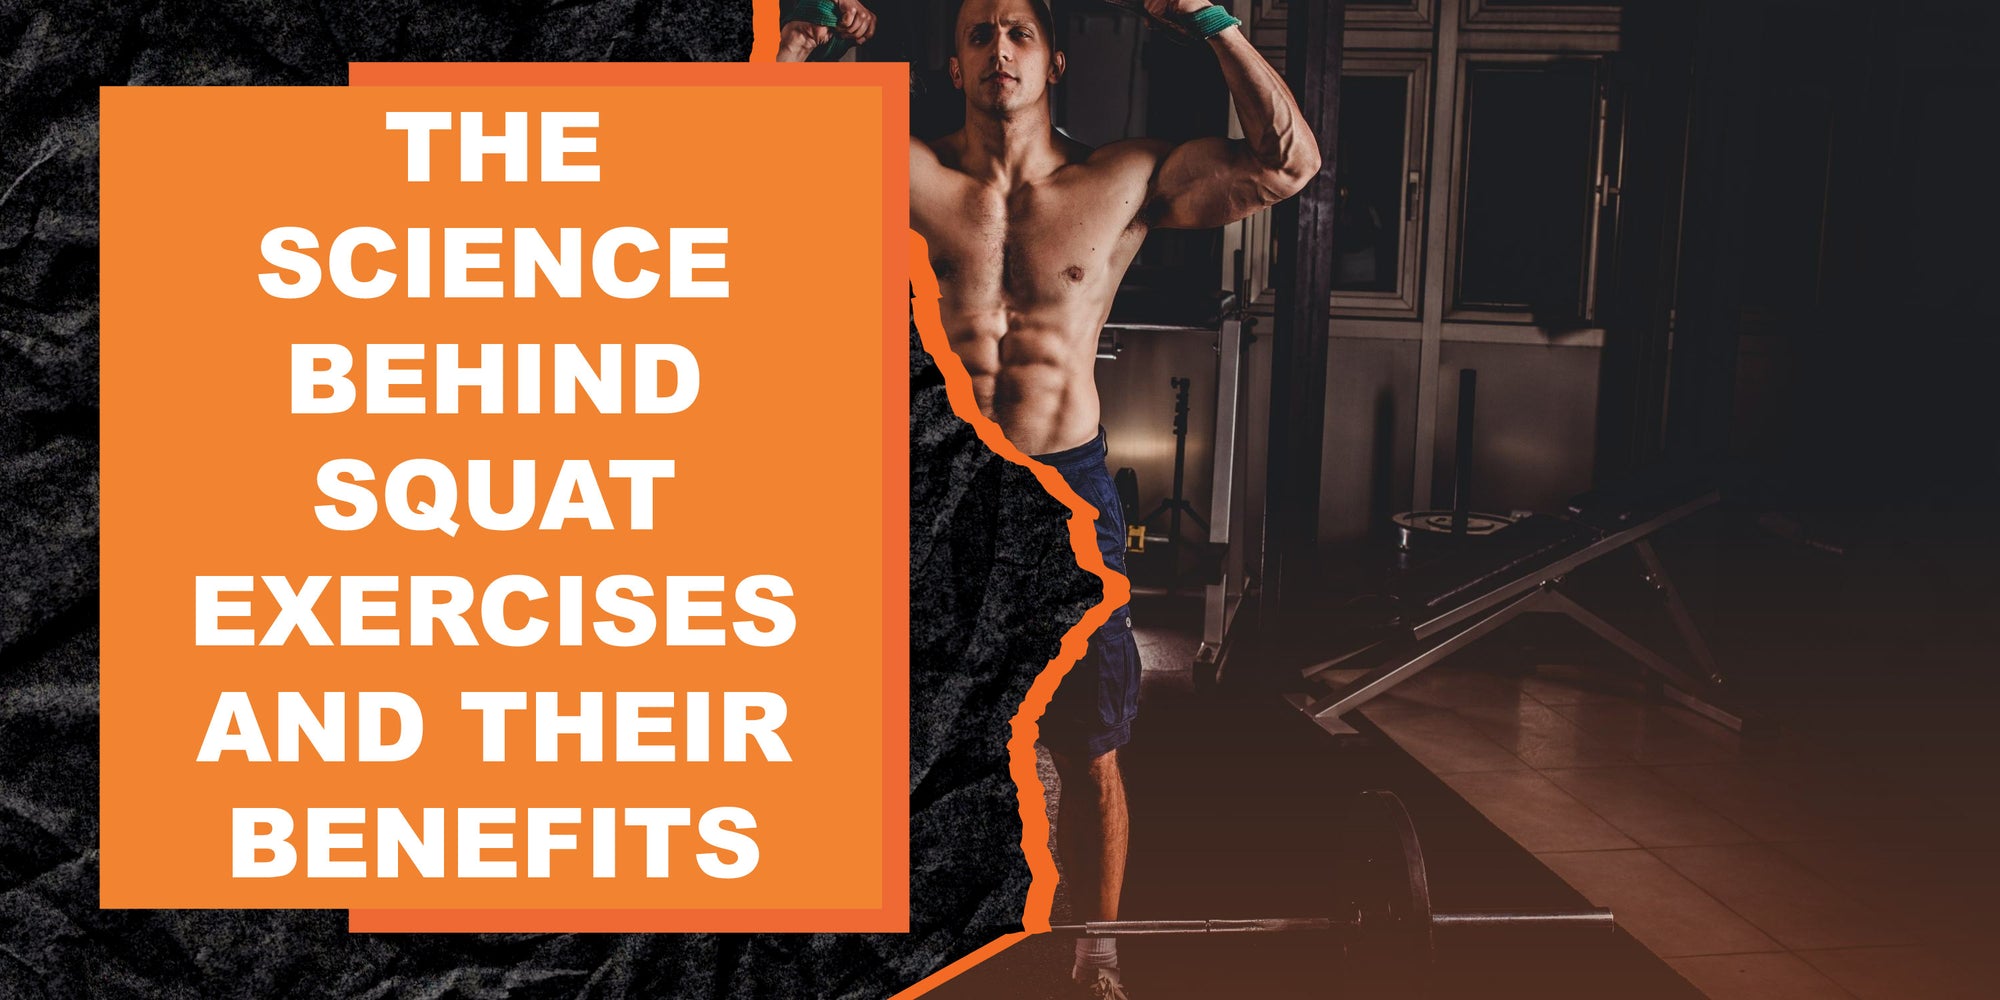 The Science Behind Squat Exercises and Their Benefits